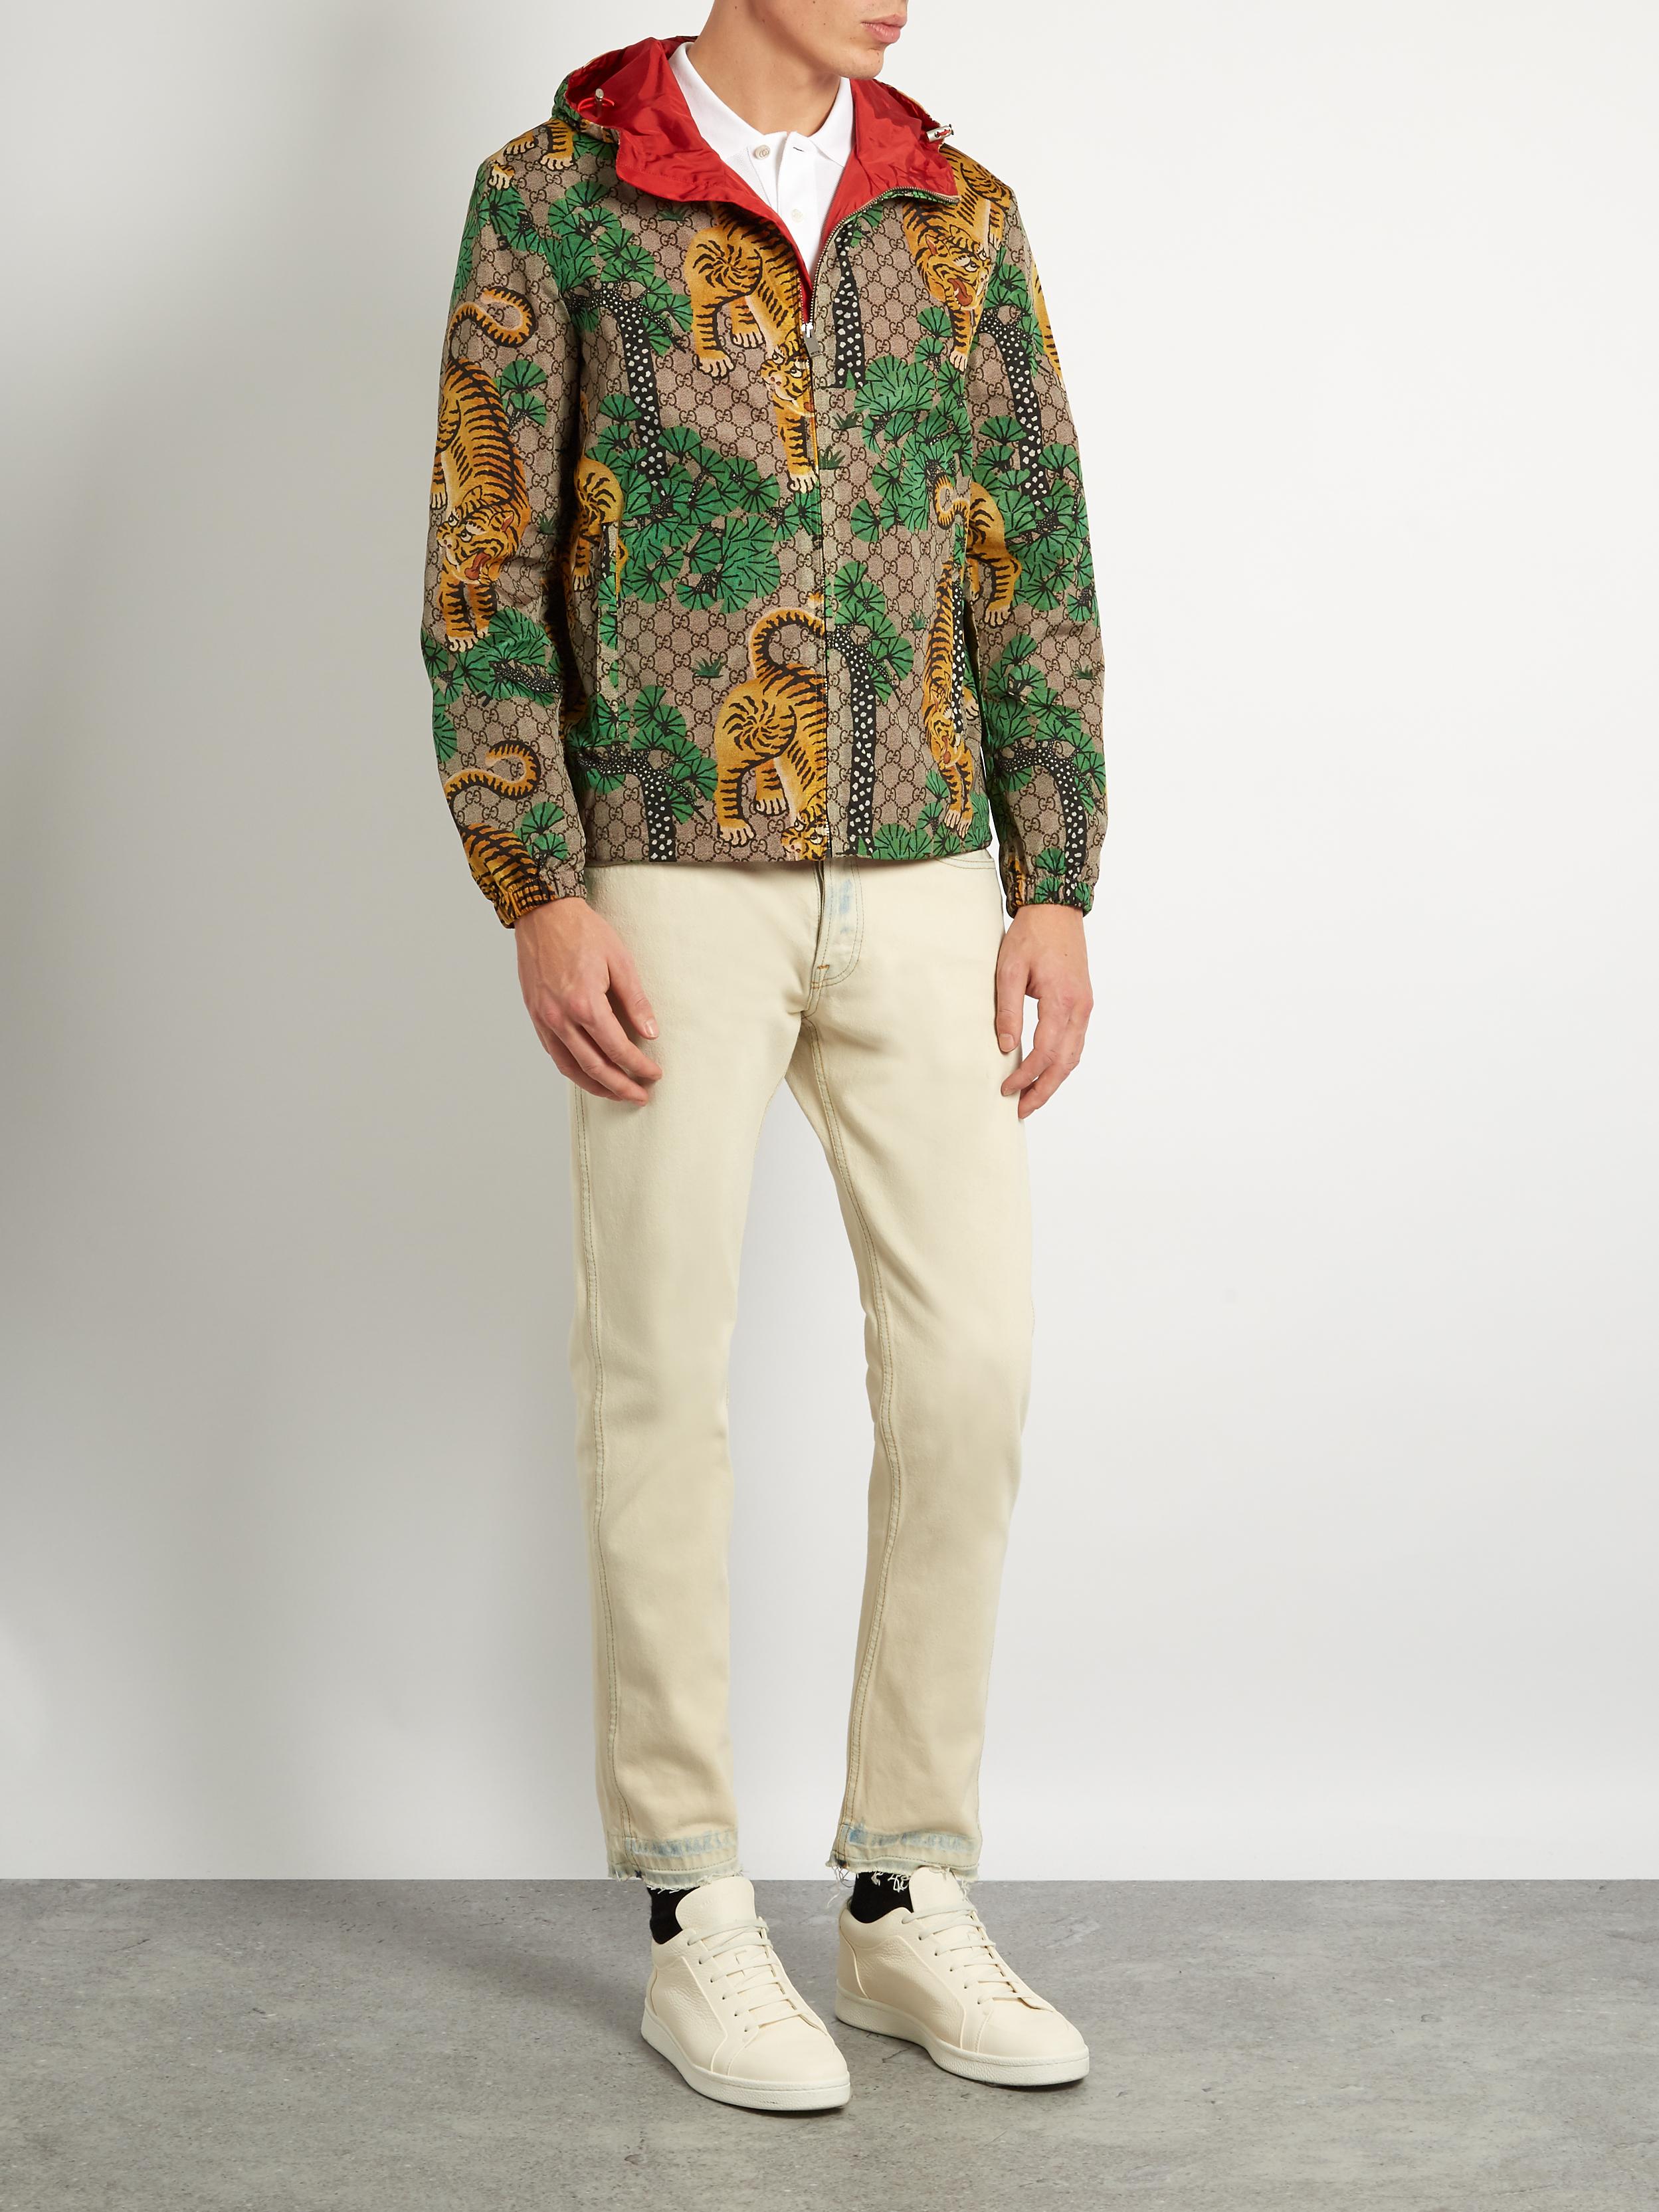 Lyst - Gucci Tiger-print Hooded Jacket in Green for Men